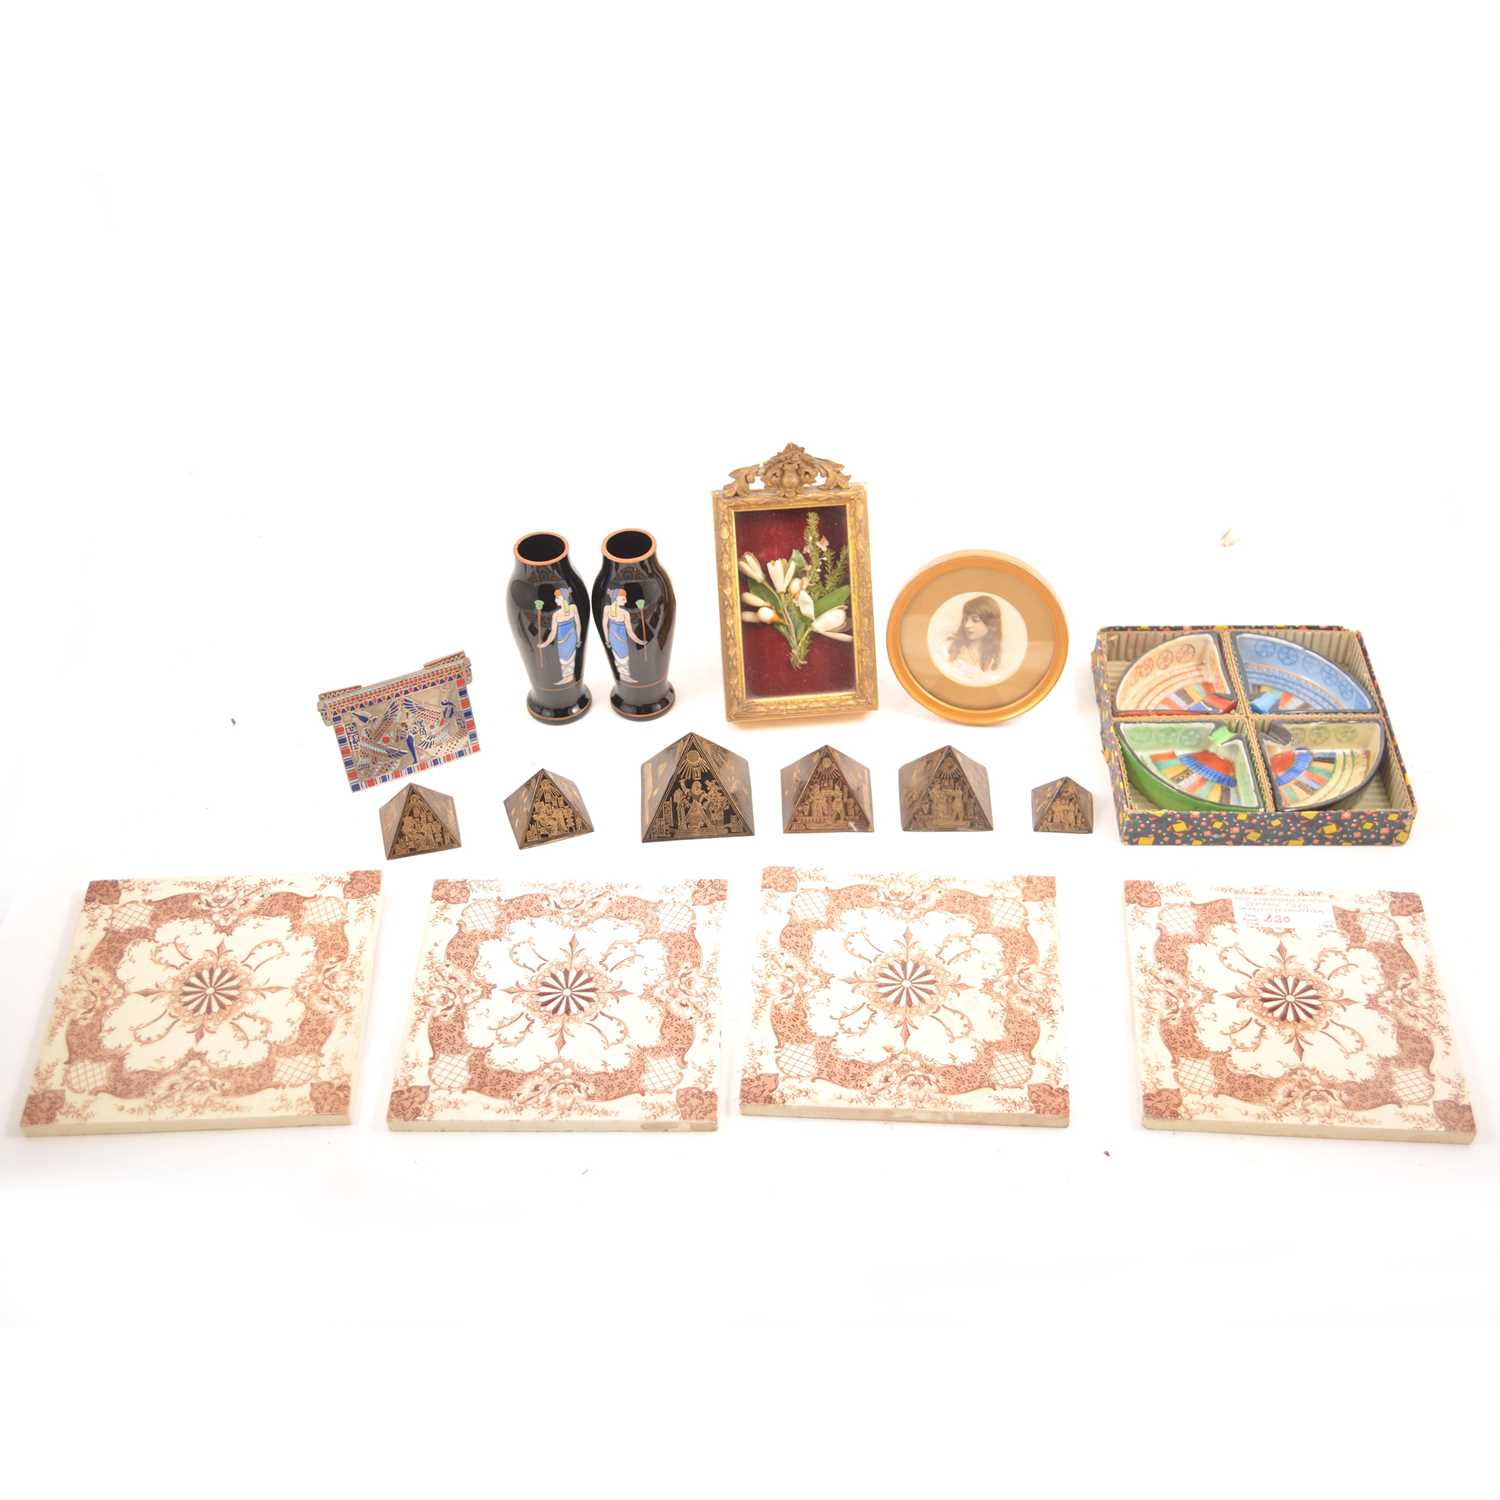 Lot 156 - A small collection of Egyptian items, plus Victorian tiles, a framed material buttonhole and a print